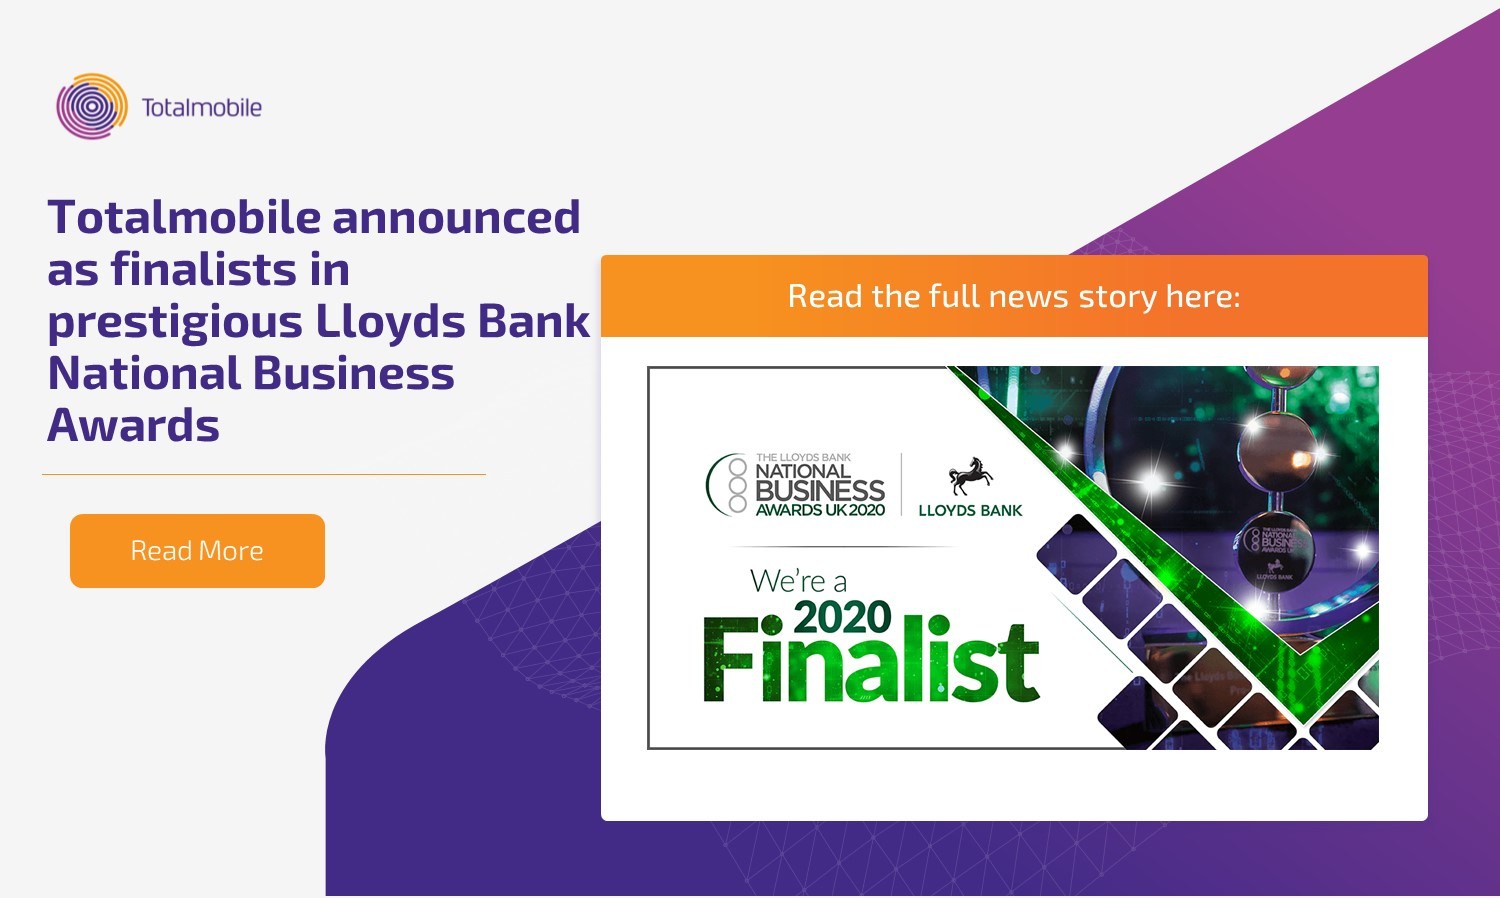 Totalmobile announced as finalists in prestigious Lloyds Bank National Business Awards